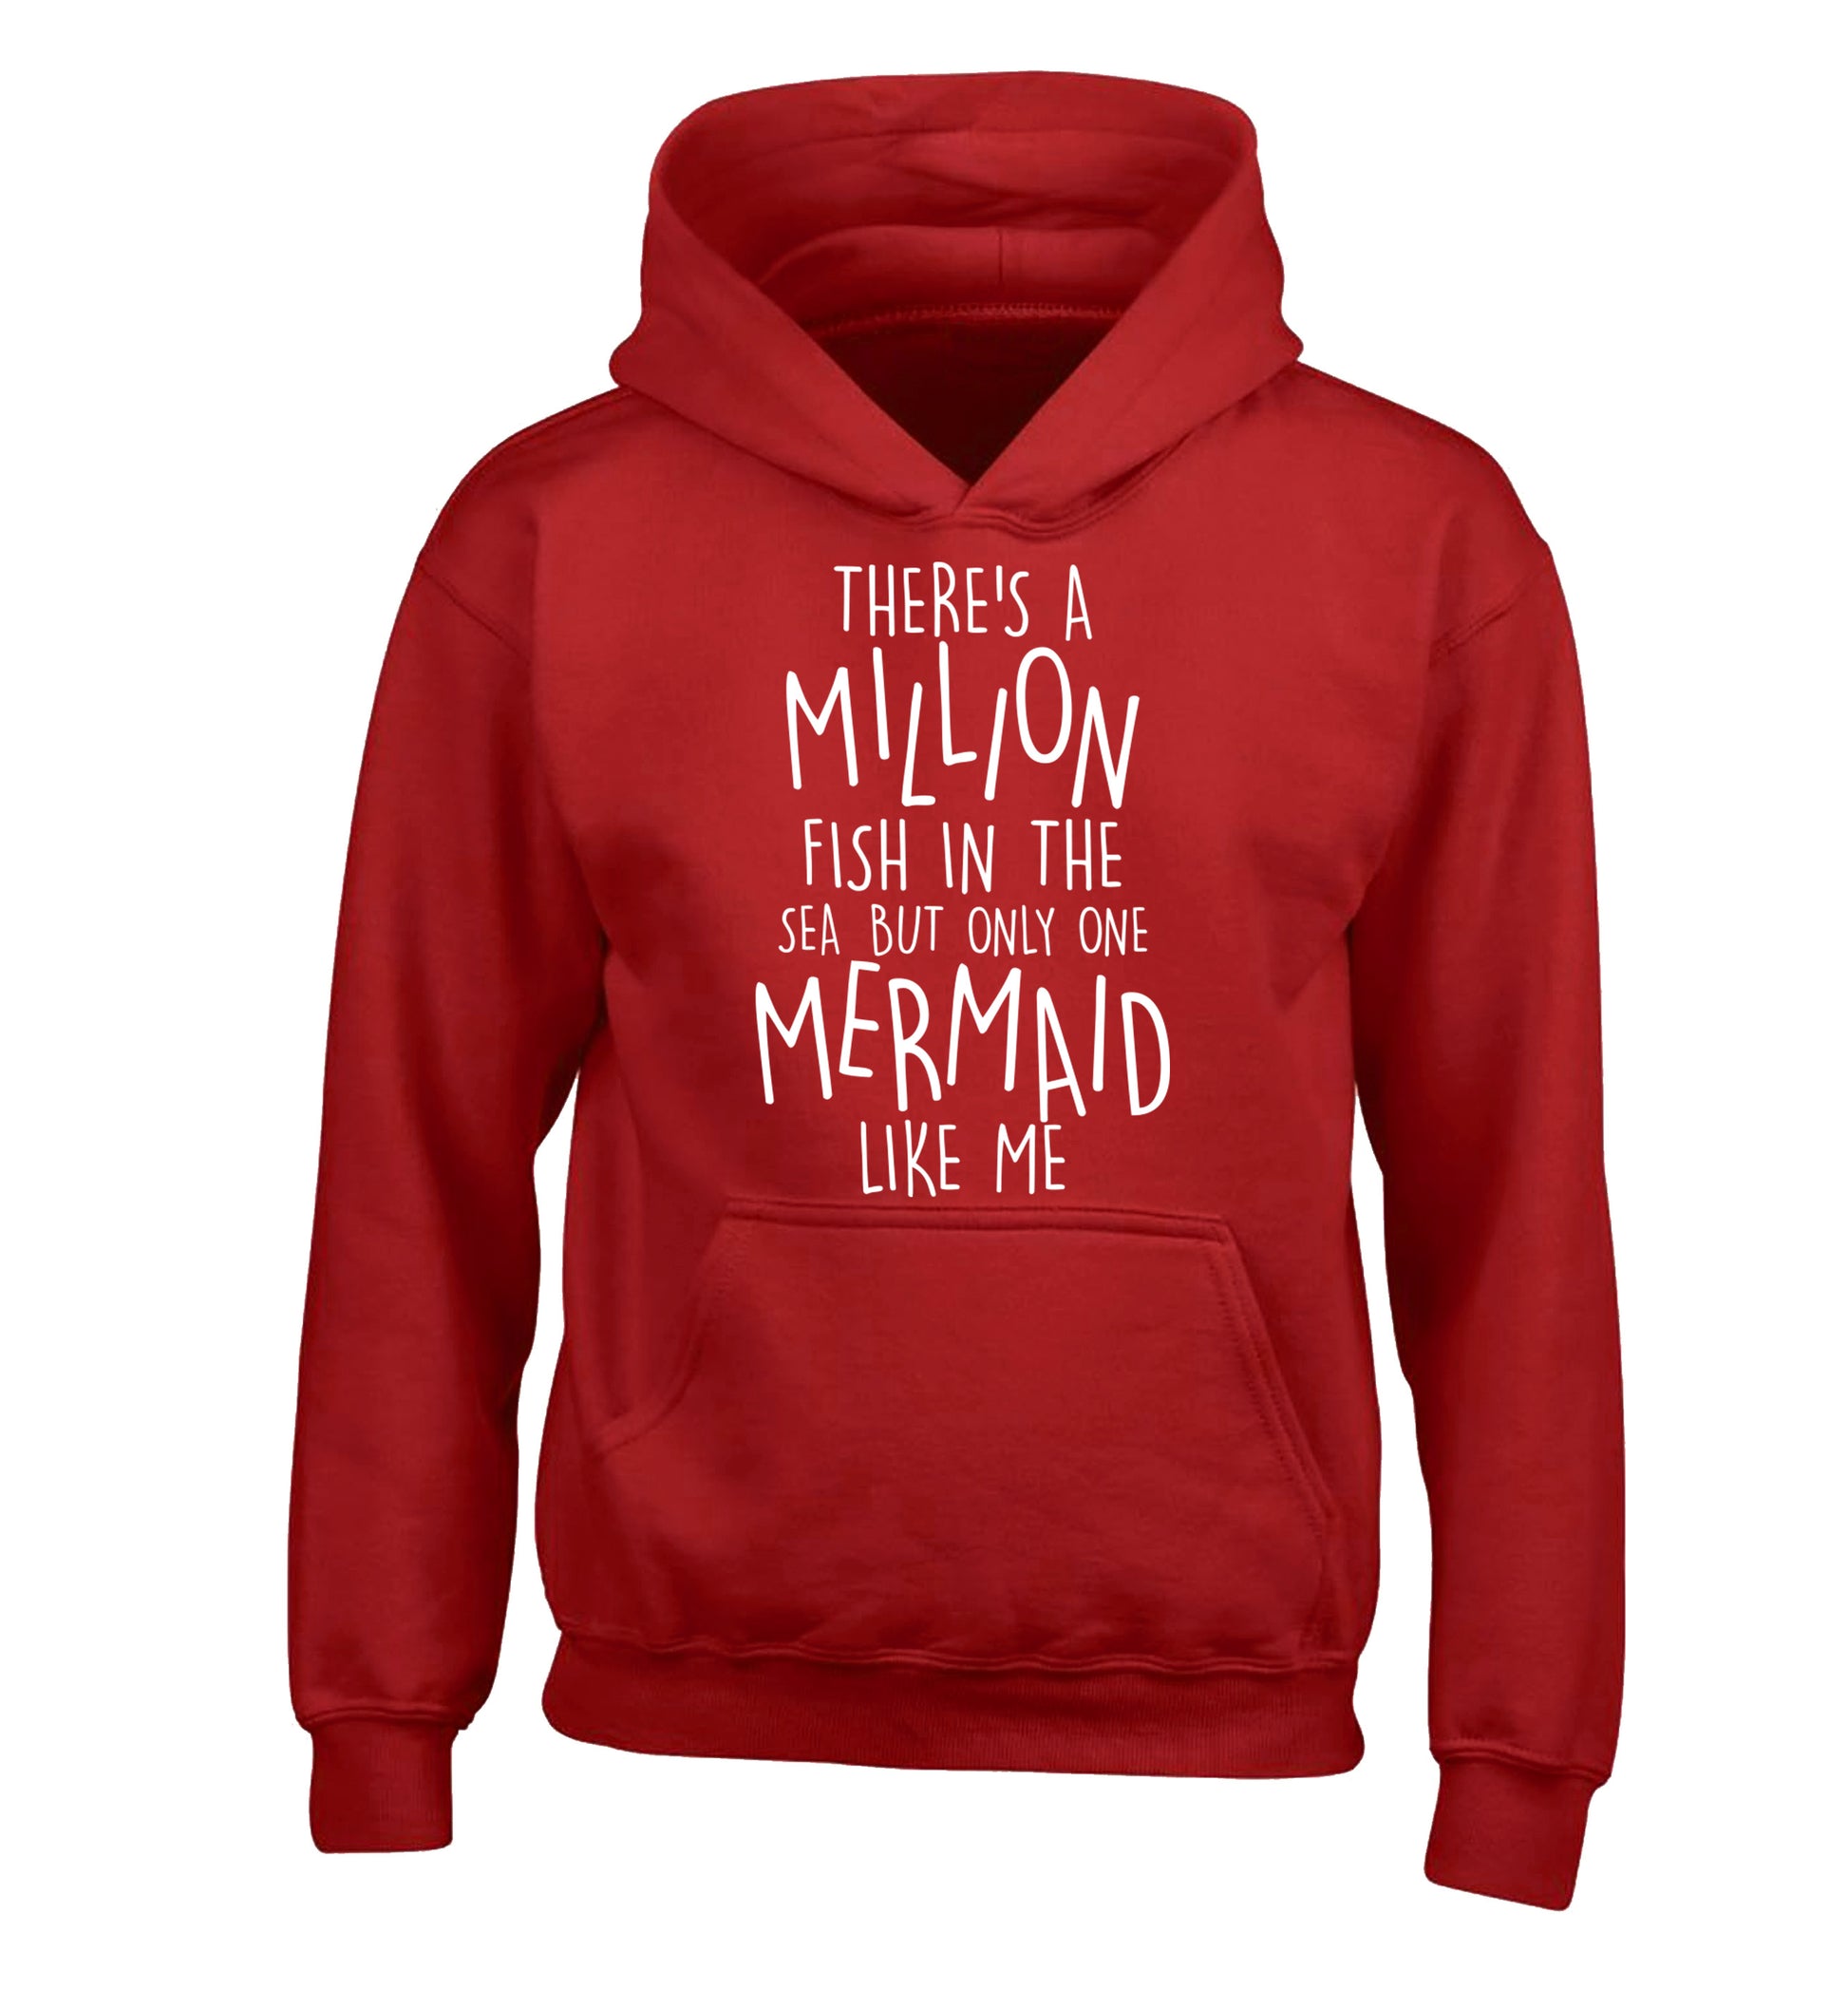 There's a million fish in the sea but only one mermaid like me children's red hoodie 12-13 Years